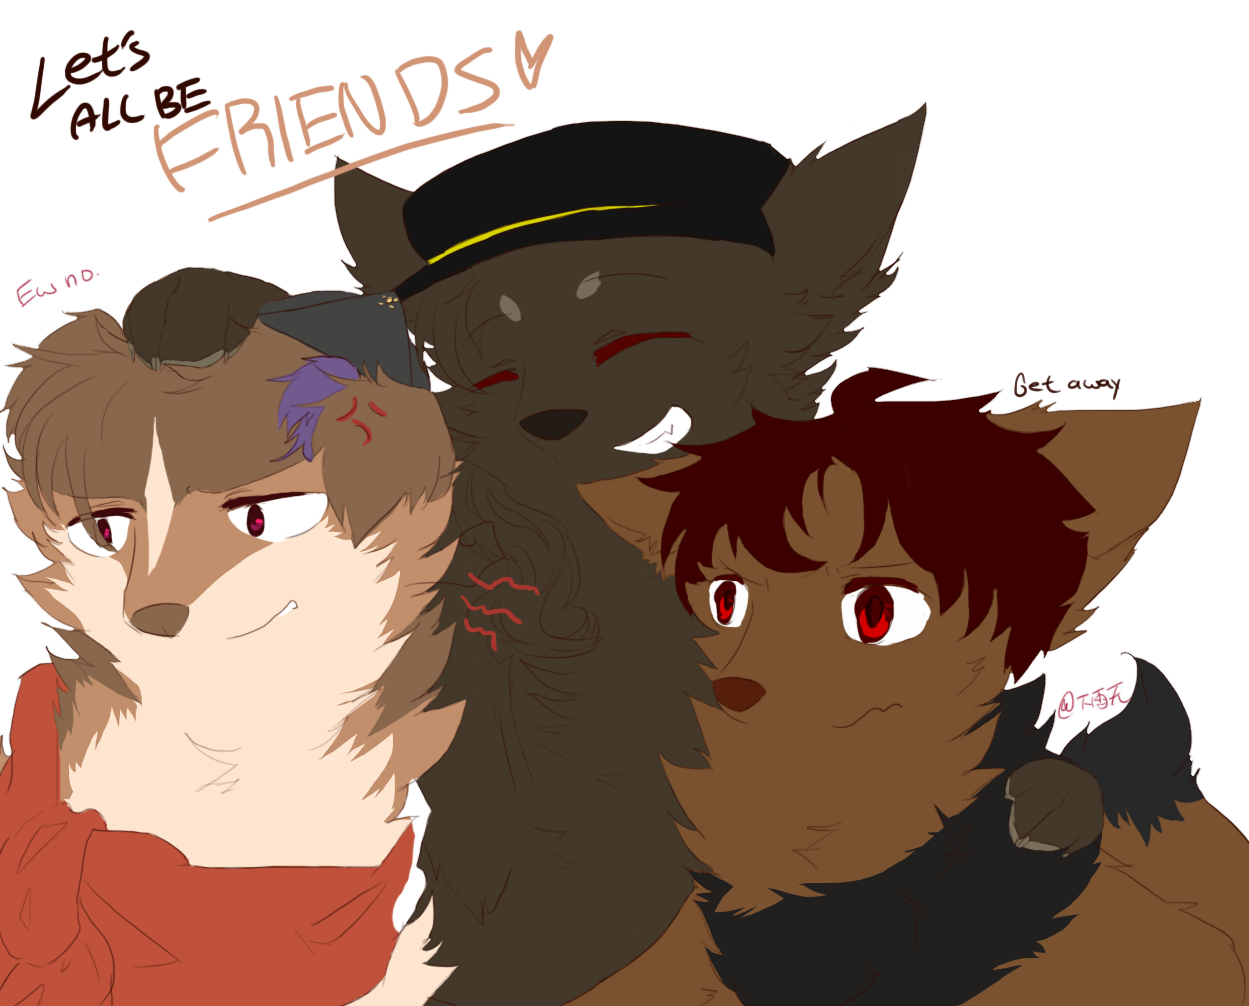 Let's all be FRIENDS~!